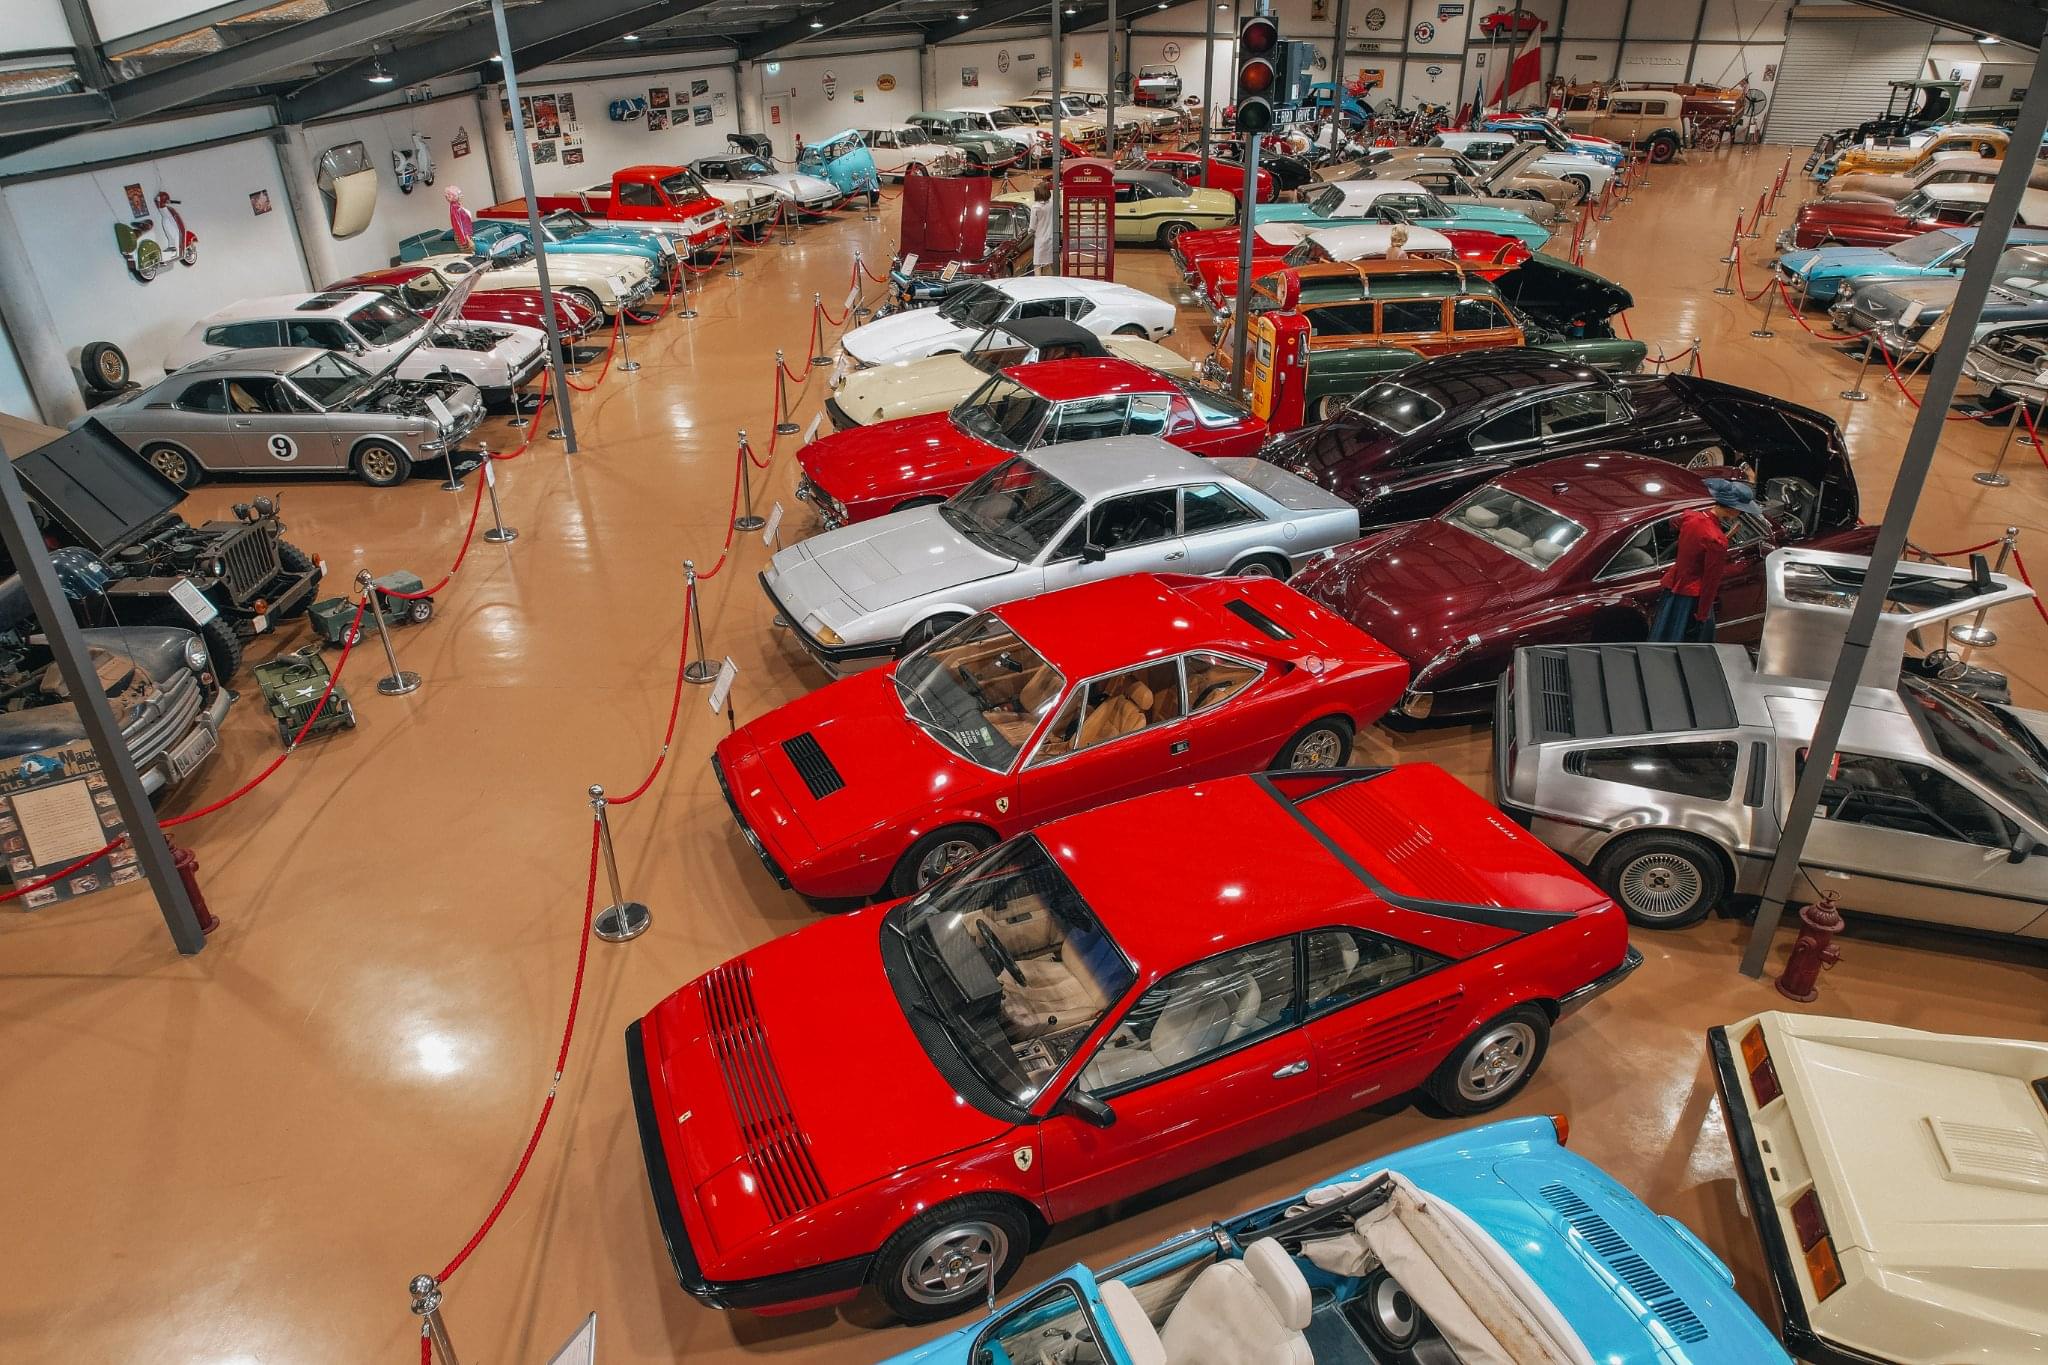 Gold Coast Motor Museum Overview